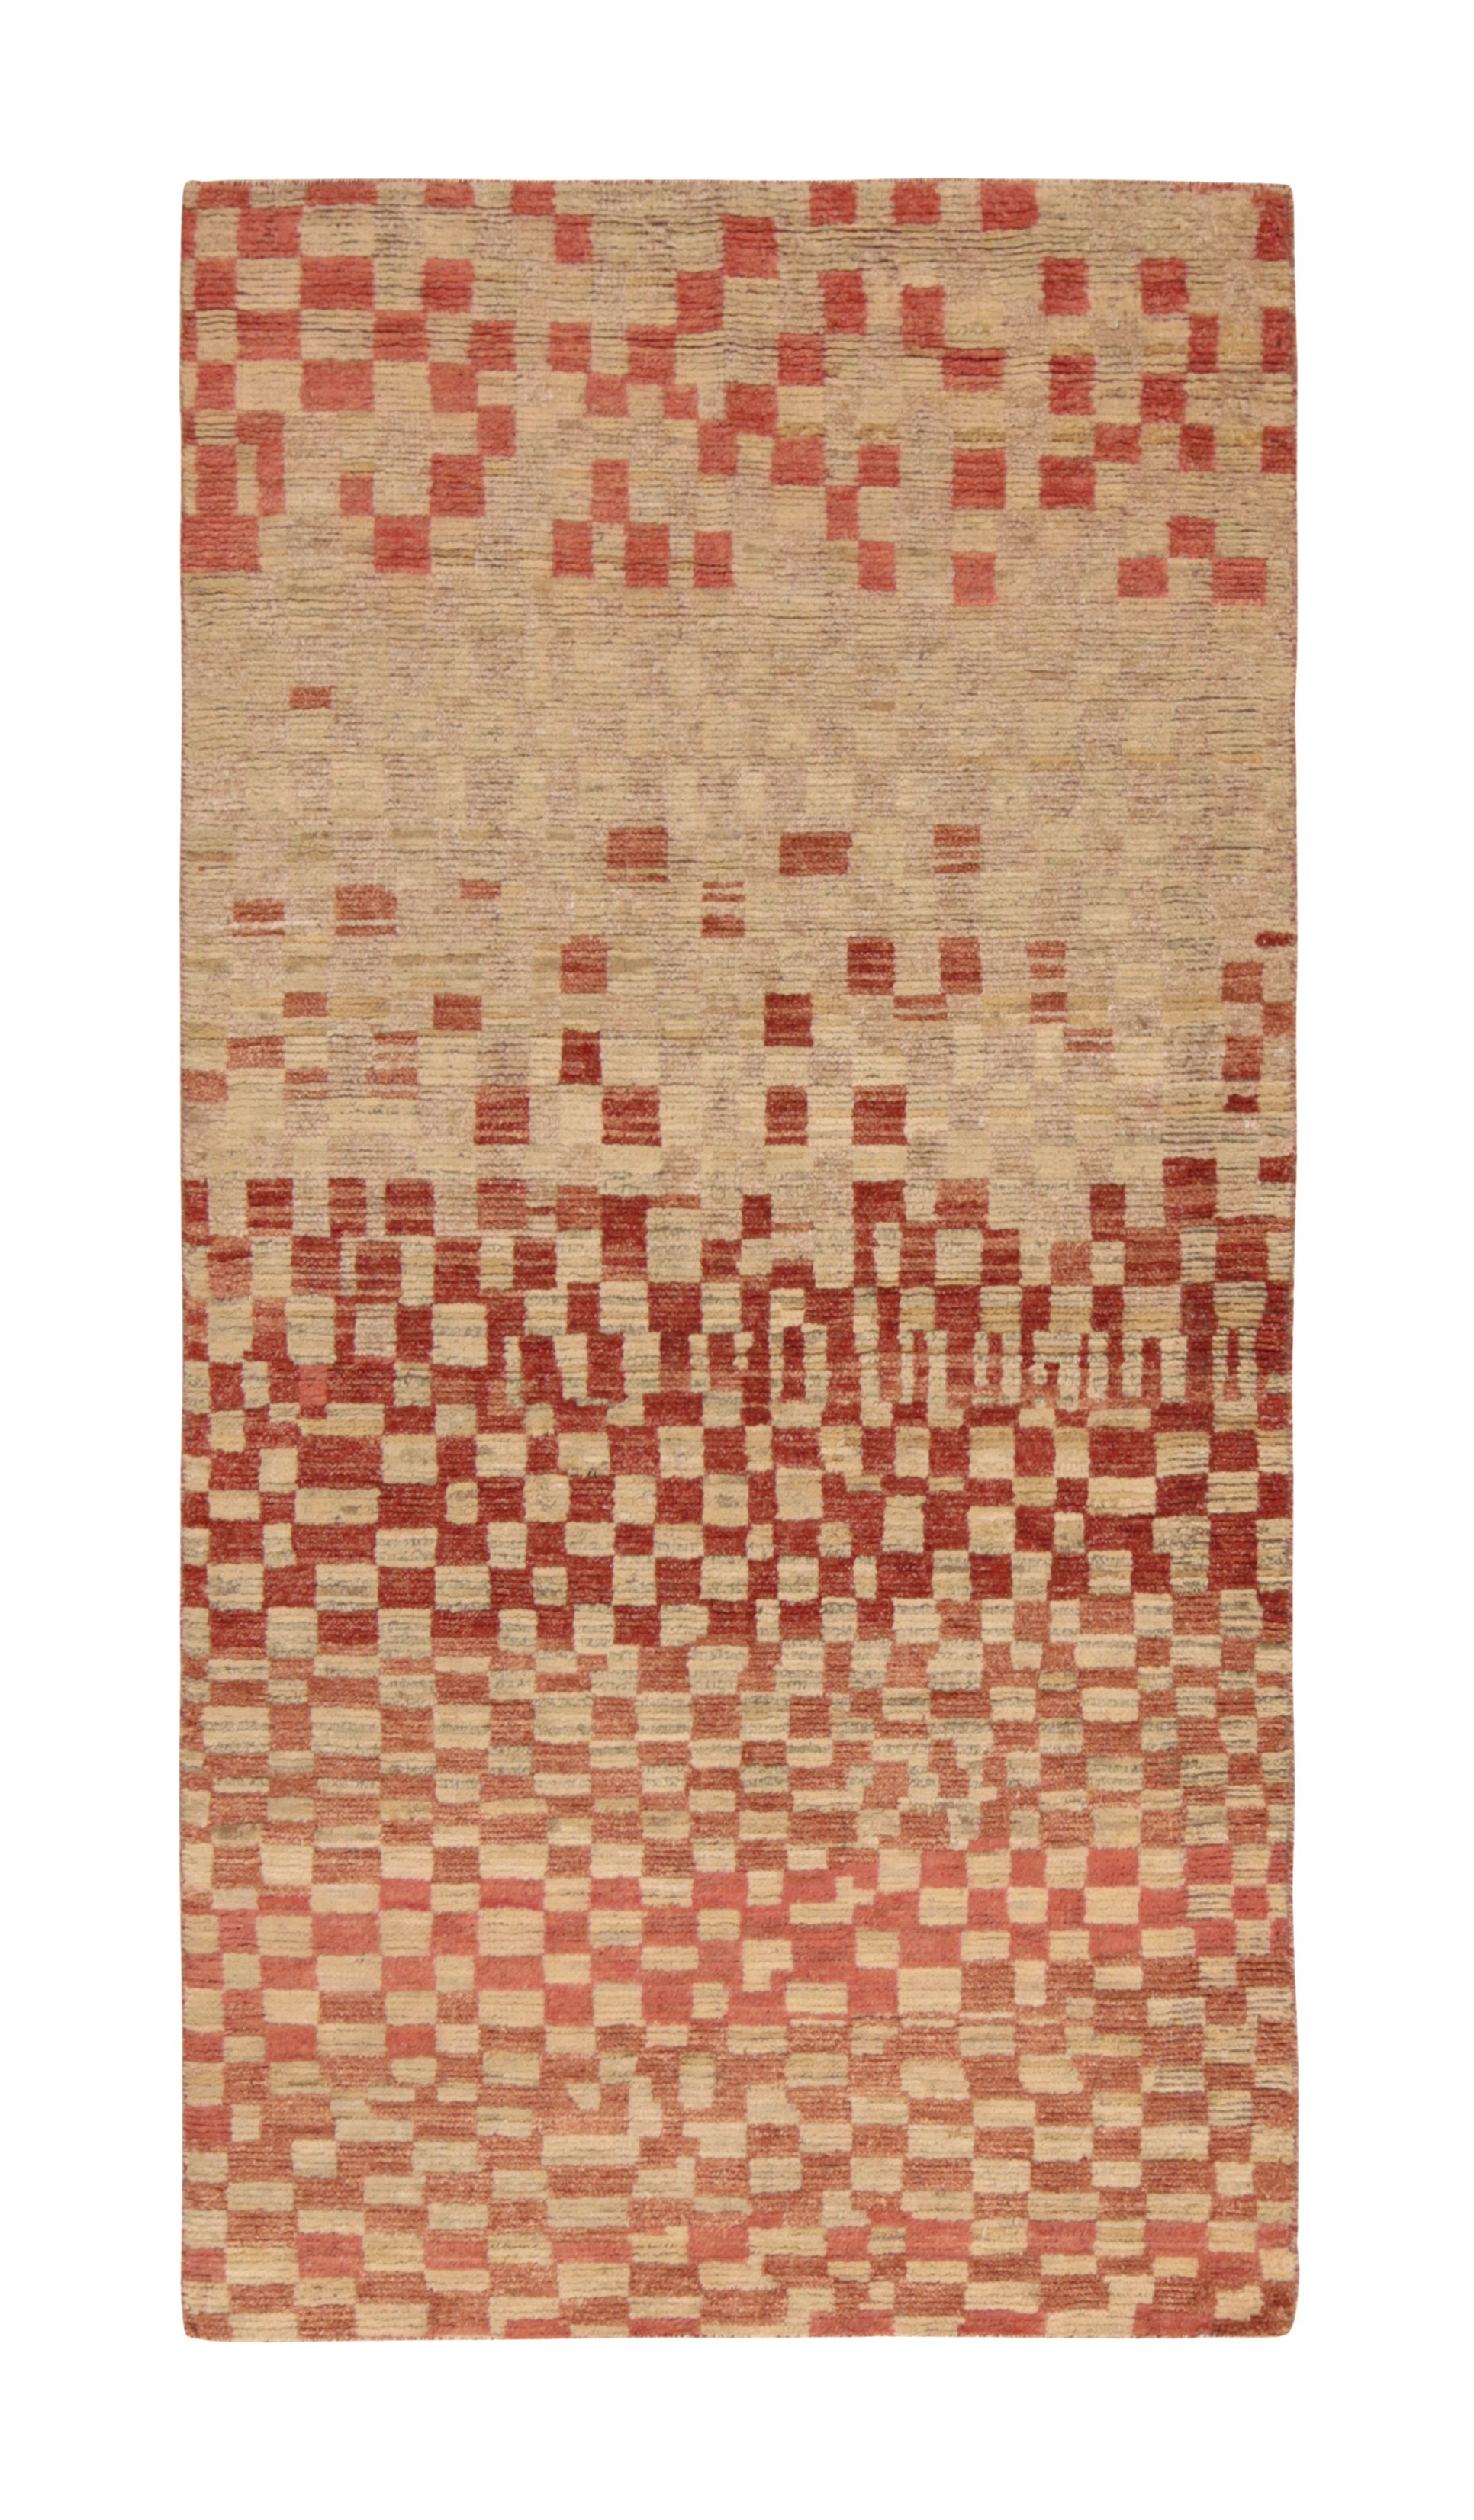 Rug & Kilim’s Moroccan Style Rug in Beige-Brown and Red Geometric Pattern For Sale